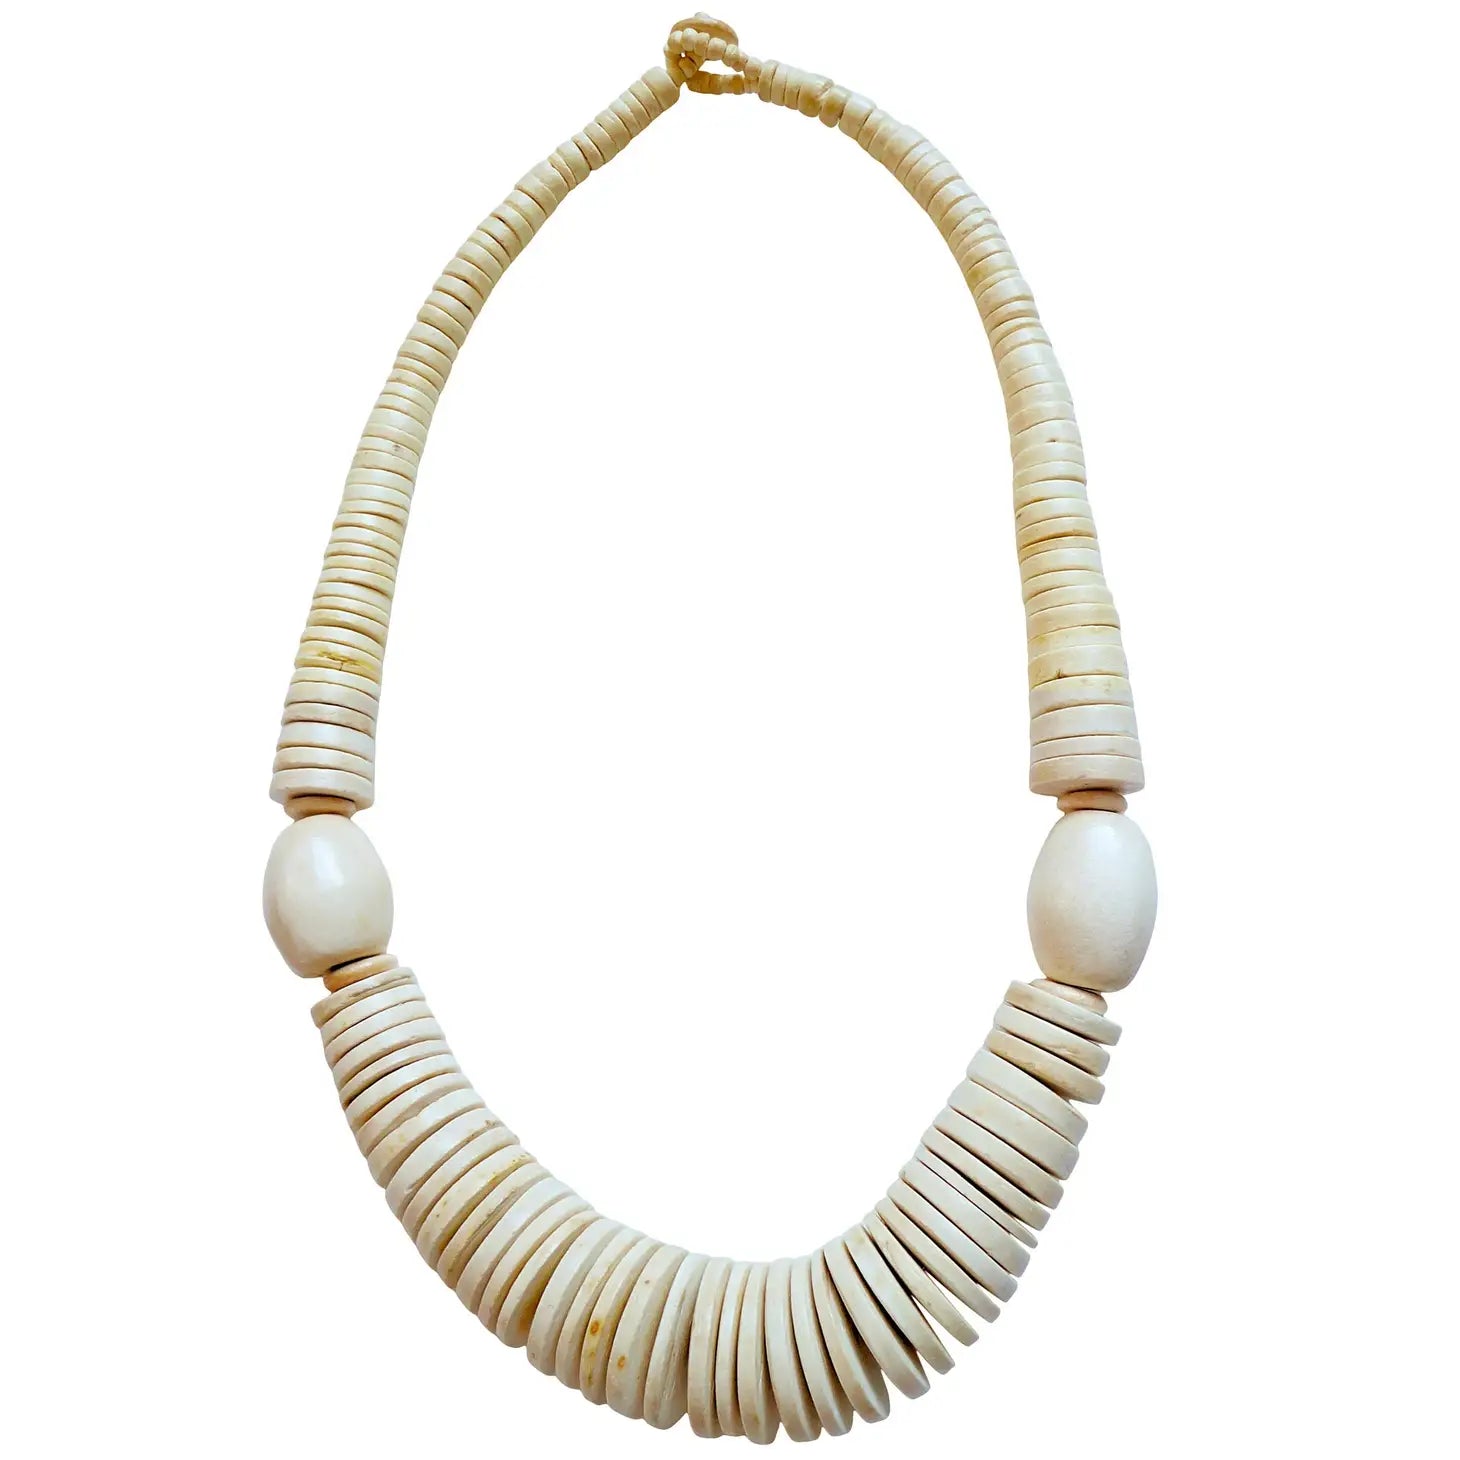 Oval shell necklace